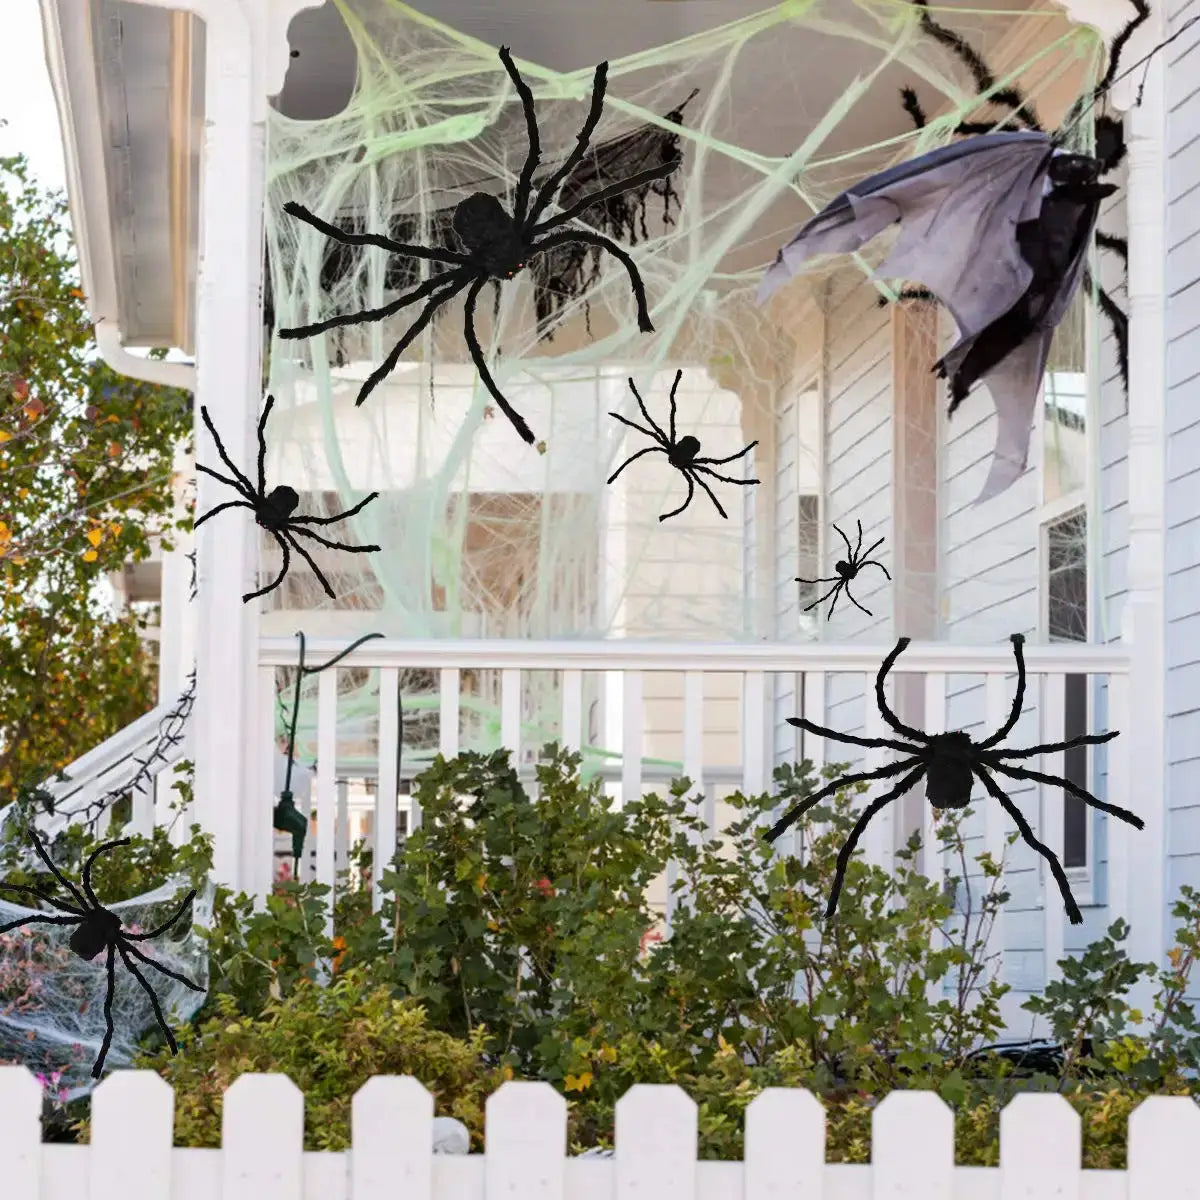 a house decorated for halloween with spider decorations